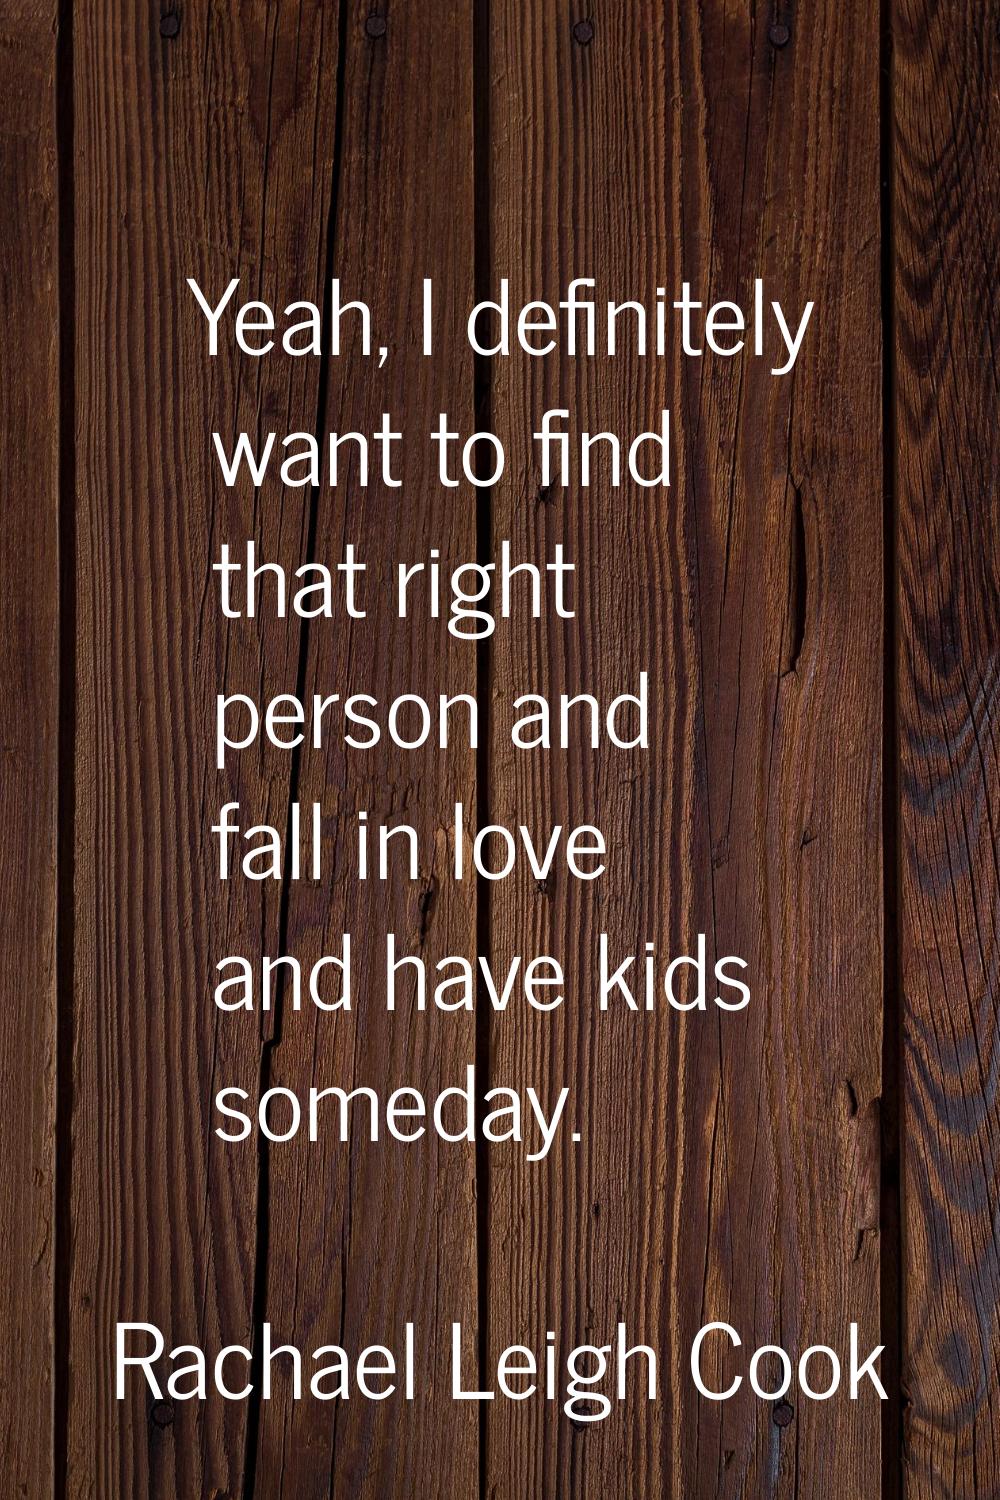 Yeah, I definitely want to find that right person and fall in love and have kids someday.